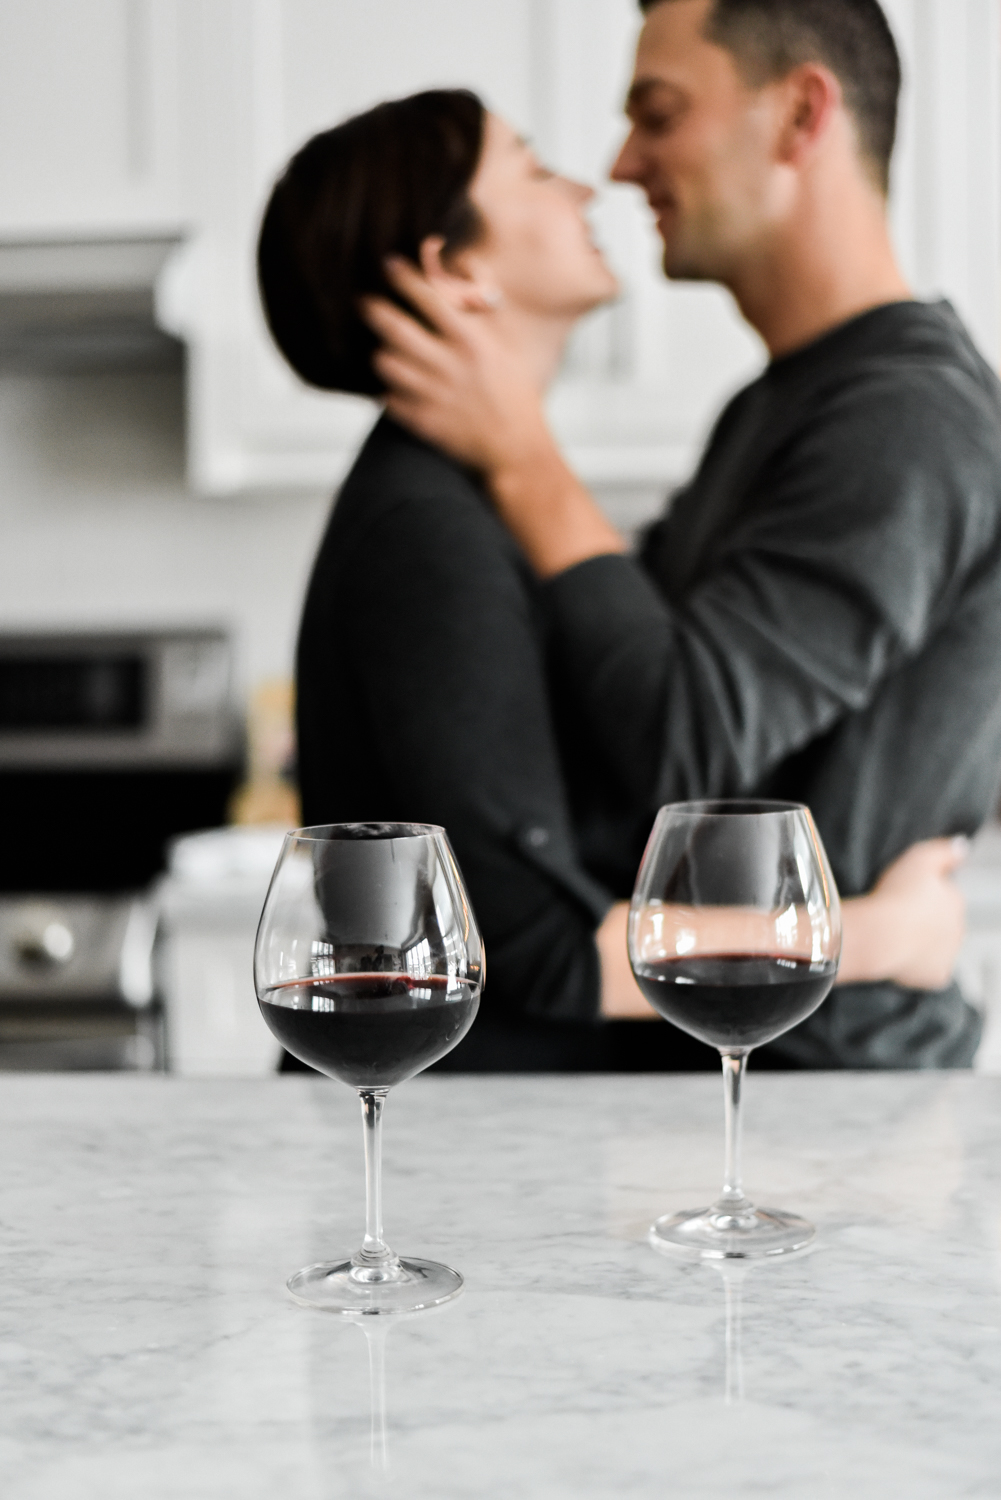 Red wine for this winter engagement session